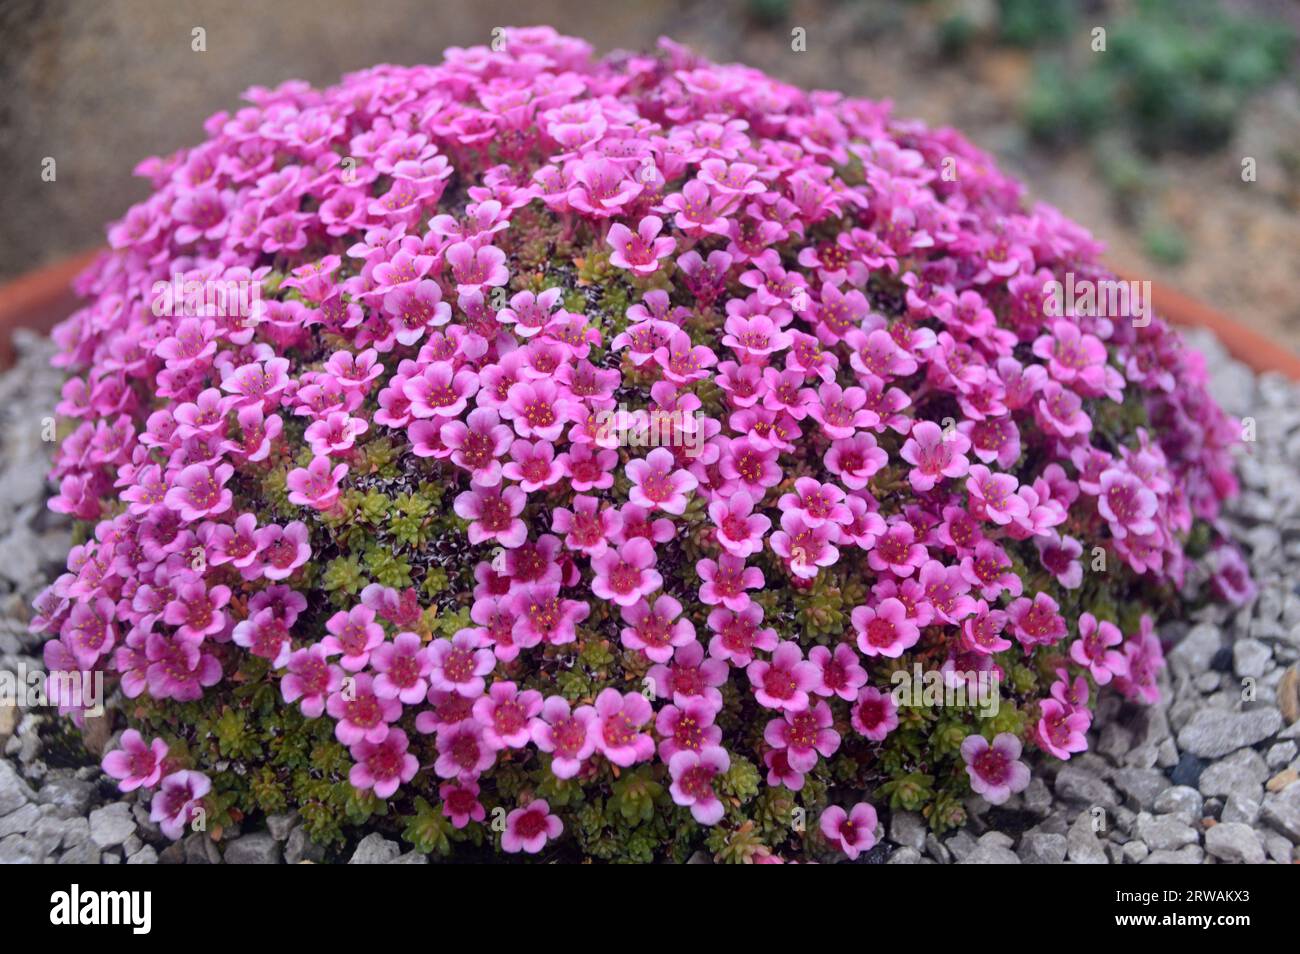 Round Clump of Small Purple Saxifraga 'Lismore Carmine' Flowers grown in the Alpine House at RHS Garden Harlow Carr, Harrogate, Yorkshire, England. Stock Photo